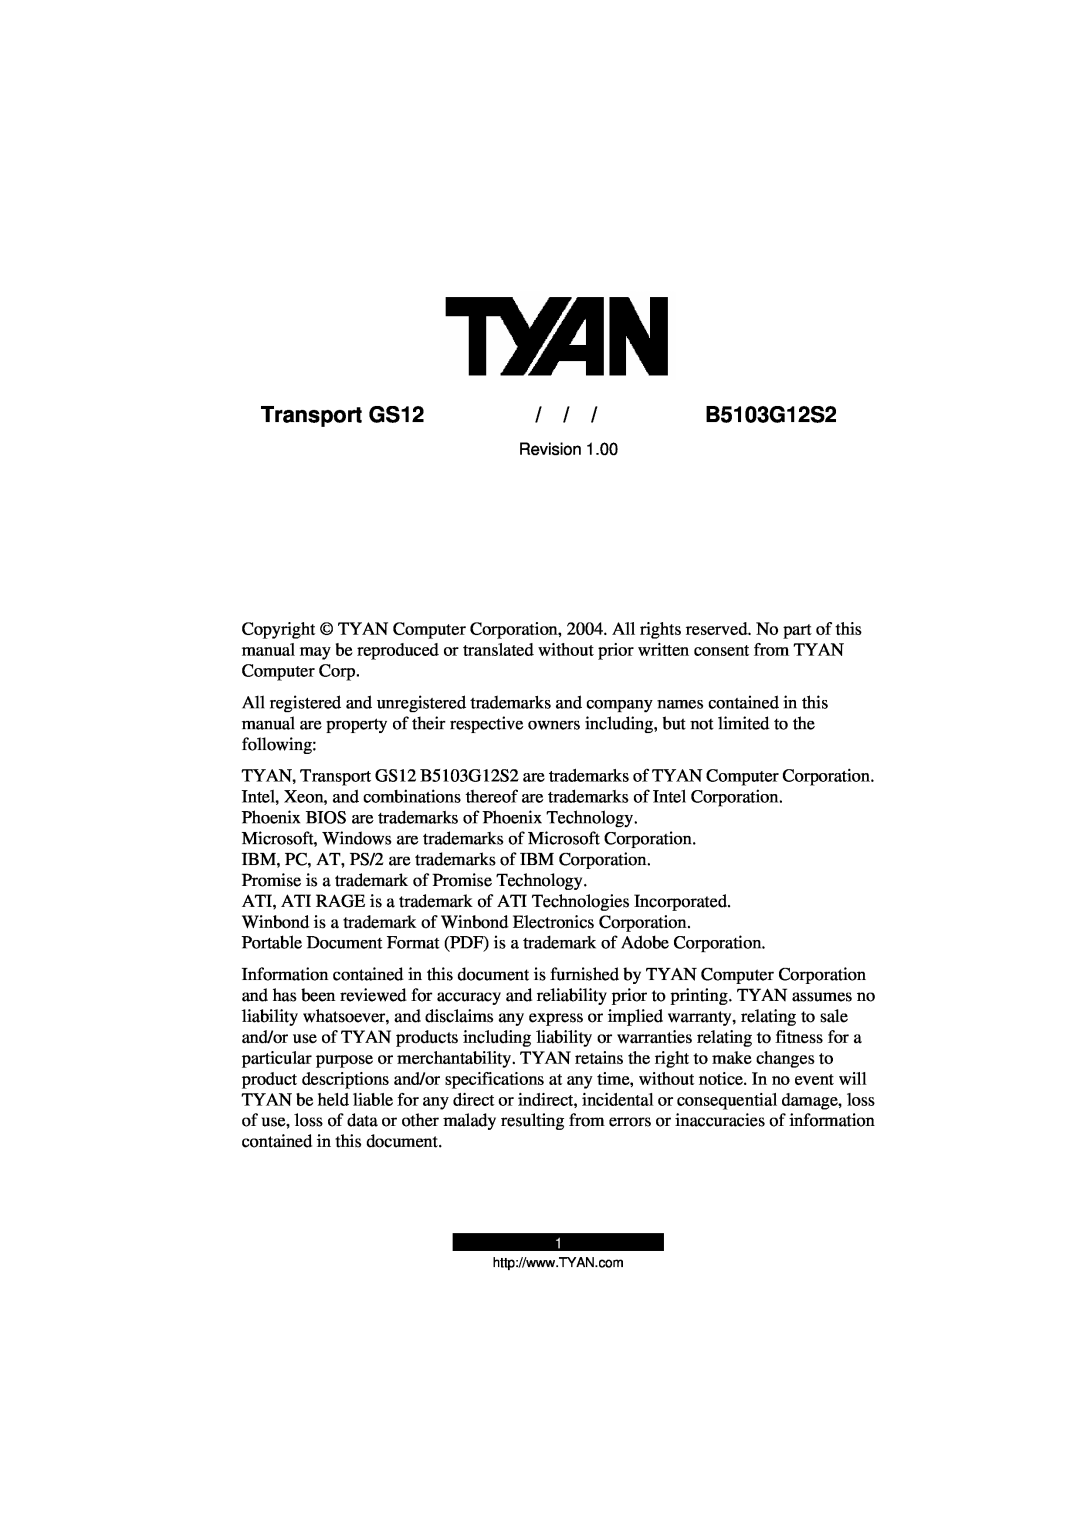 Tyan Computer B5103G12S2 manual Revision, Transport GS12 